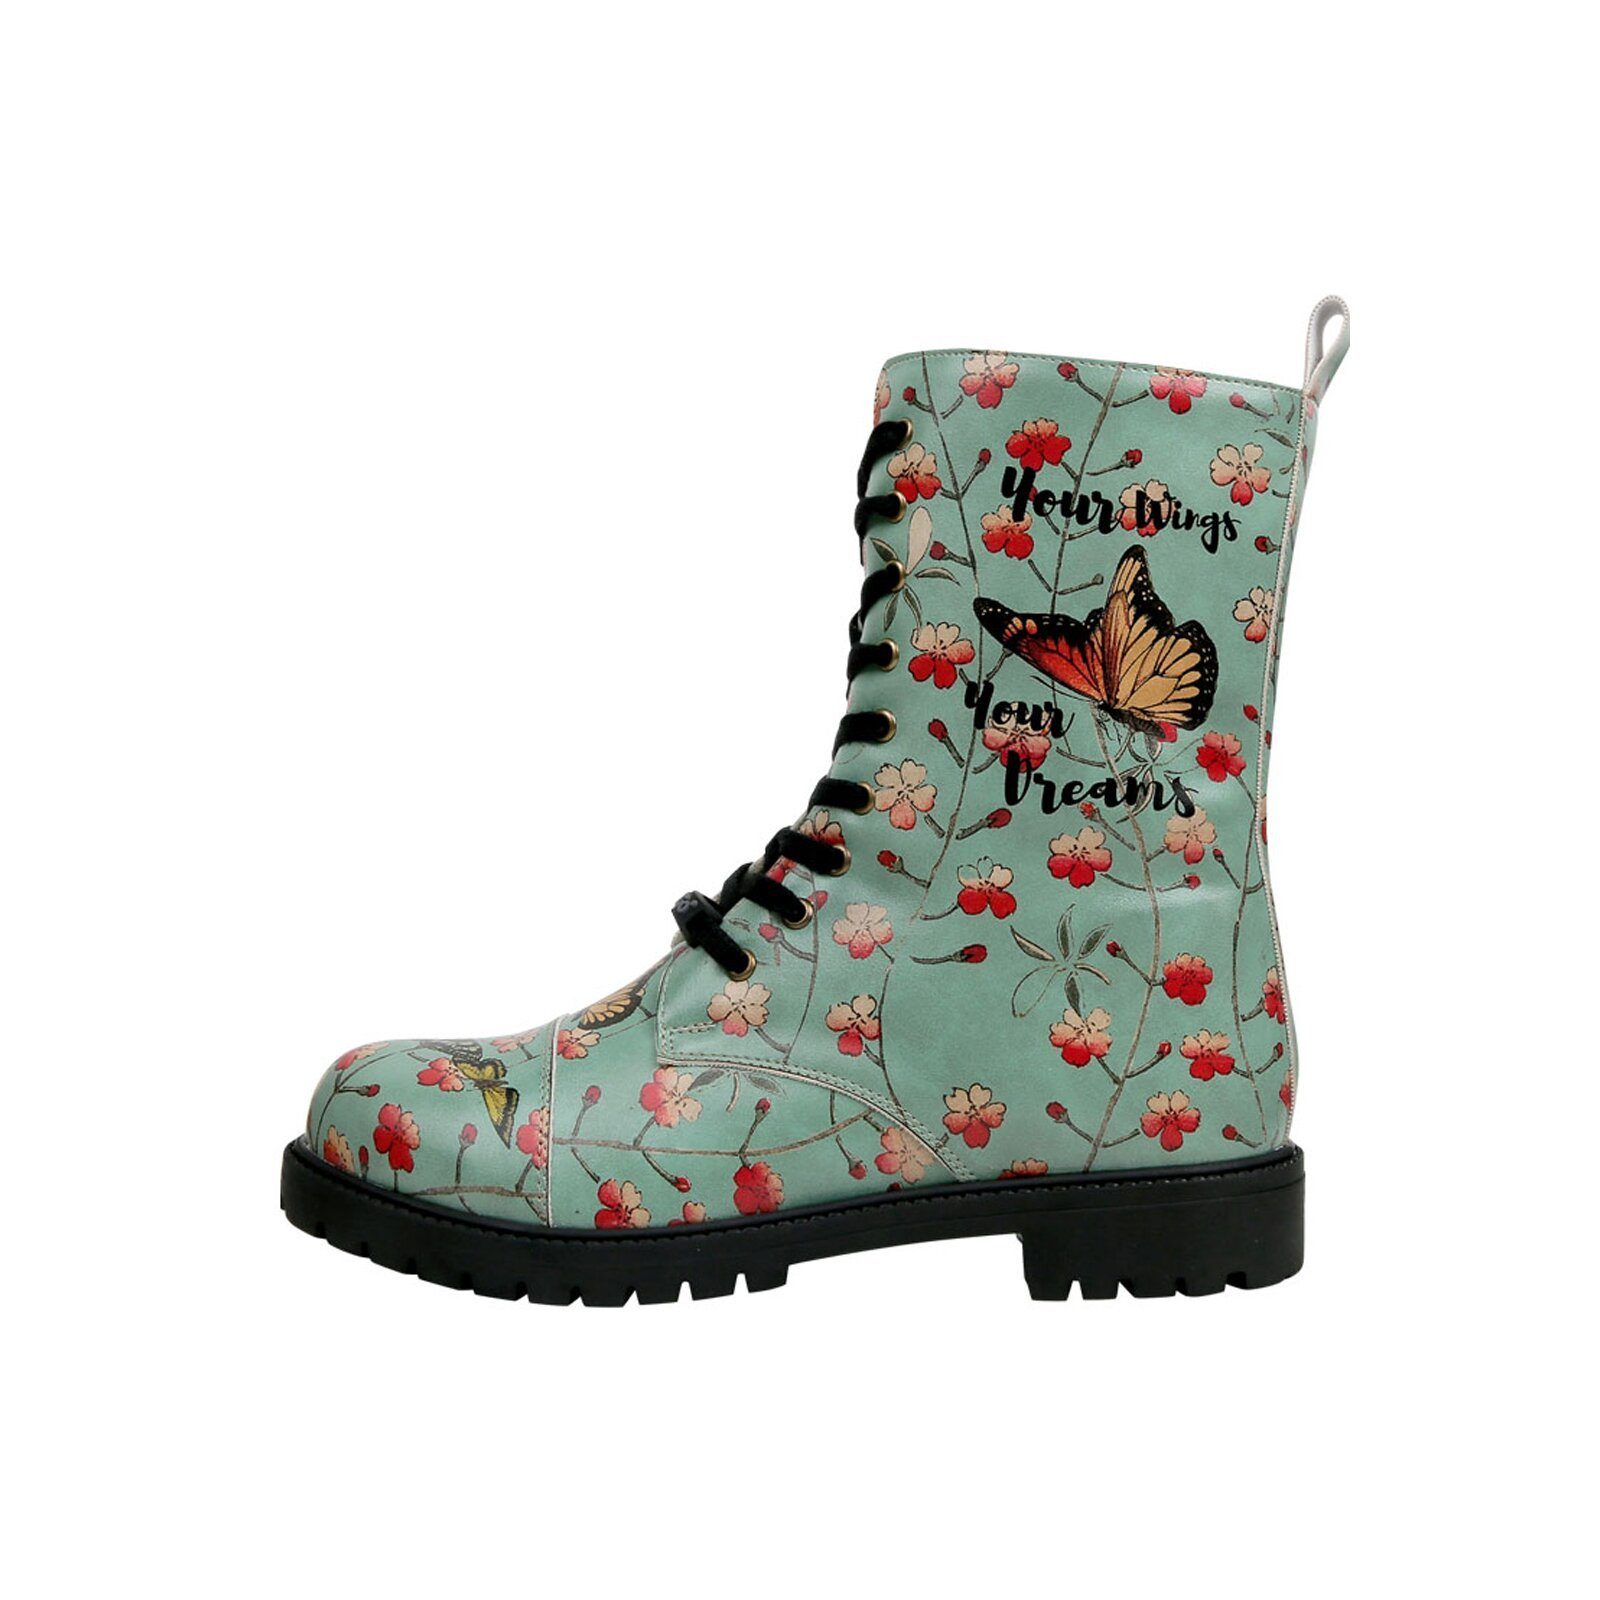 DOGO Your Wings, Your Vegan Dreams Schnürboots